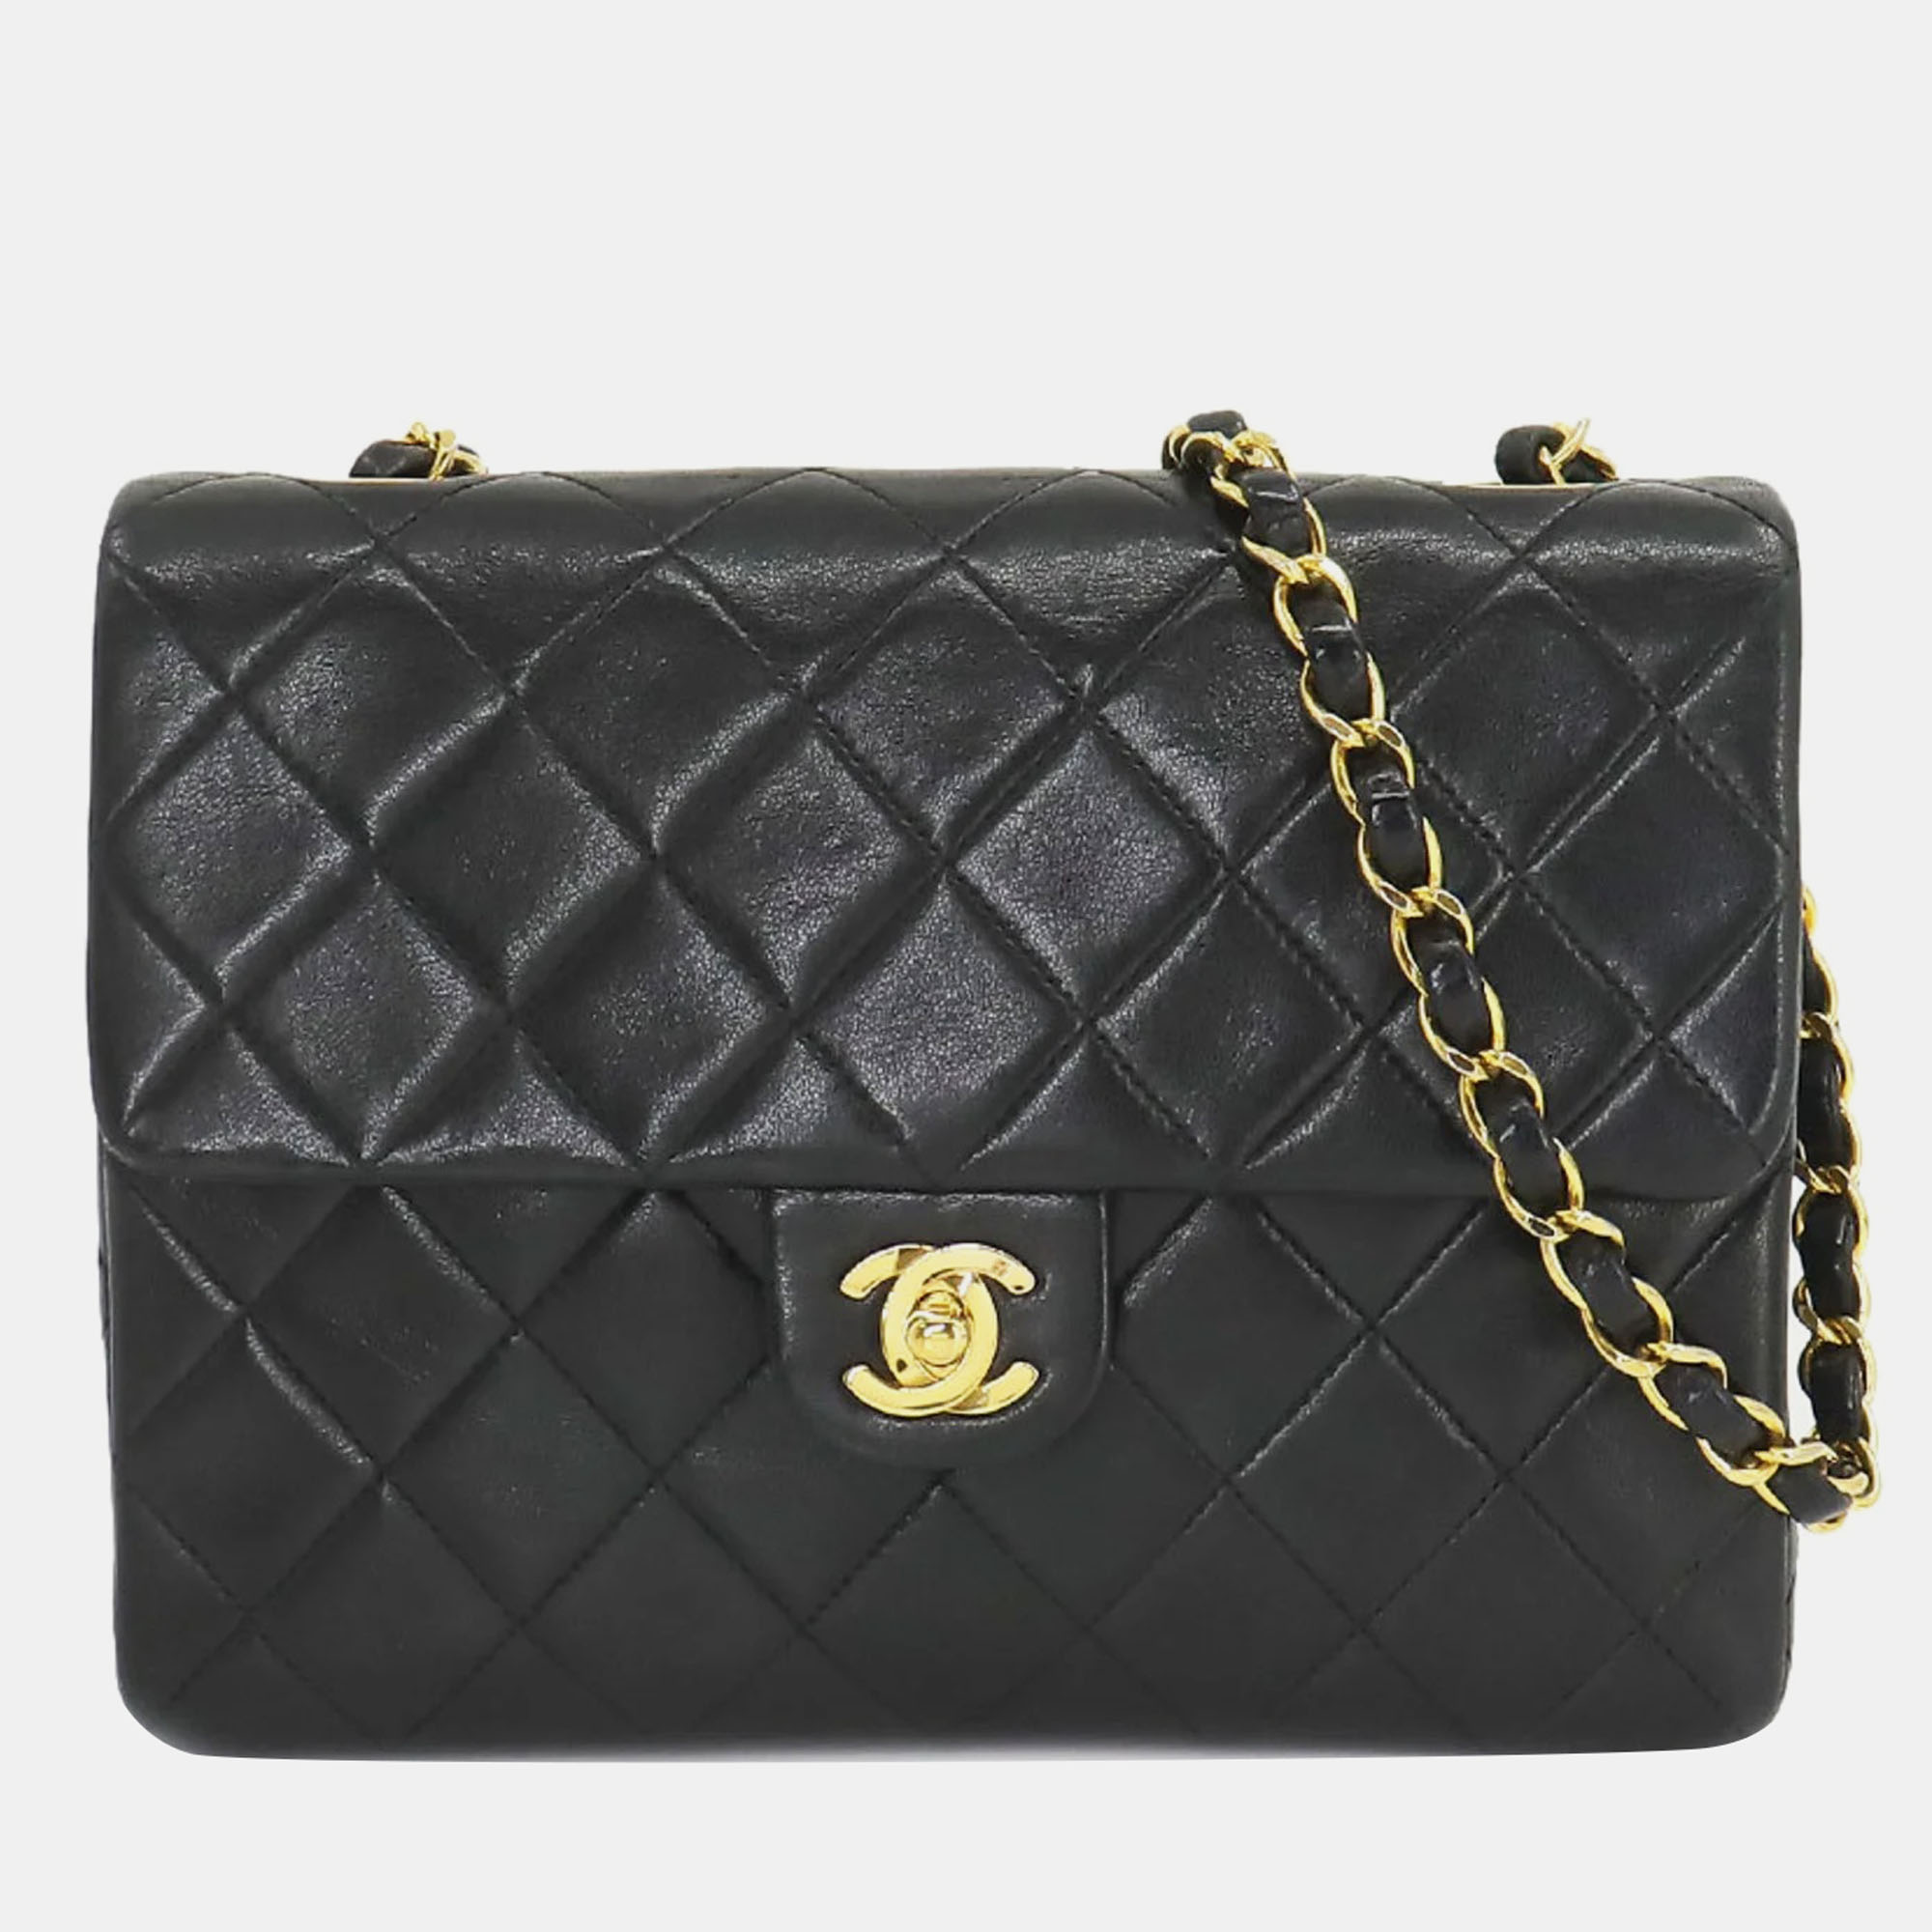 Pre-owned Chanel Black Lambskin Leather Small Vintage Classic Flap Bag